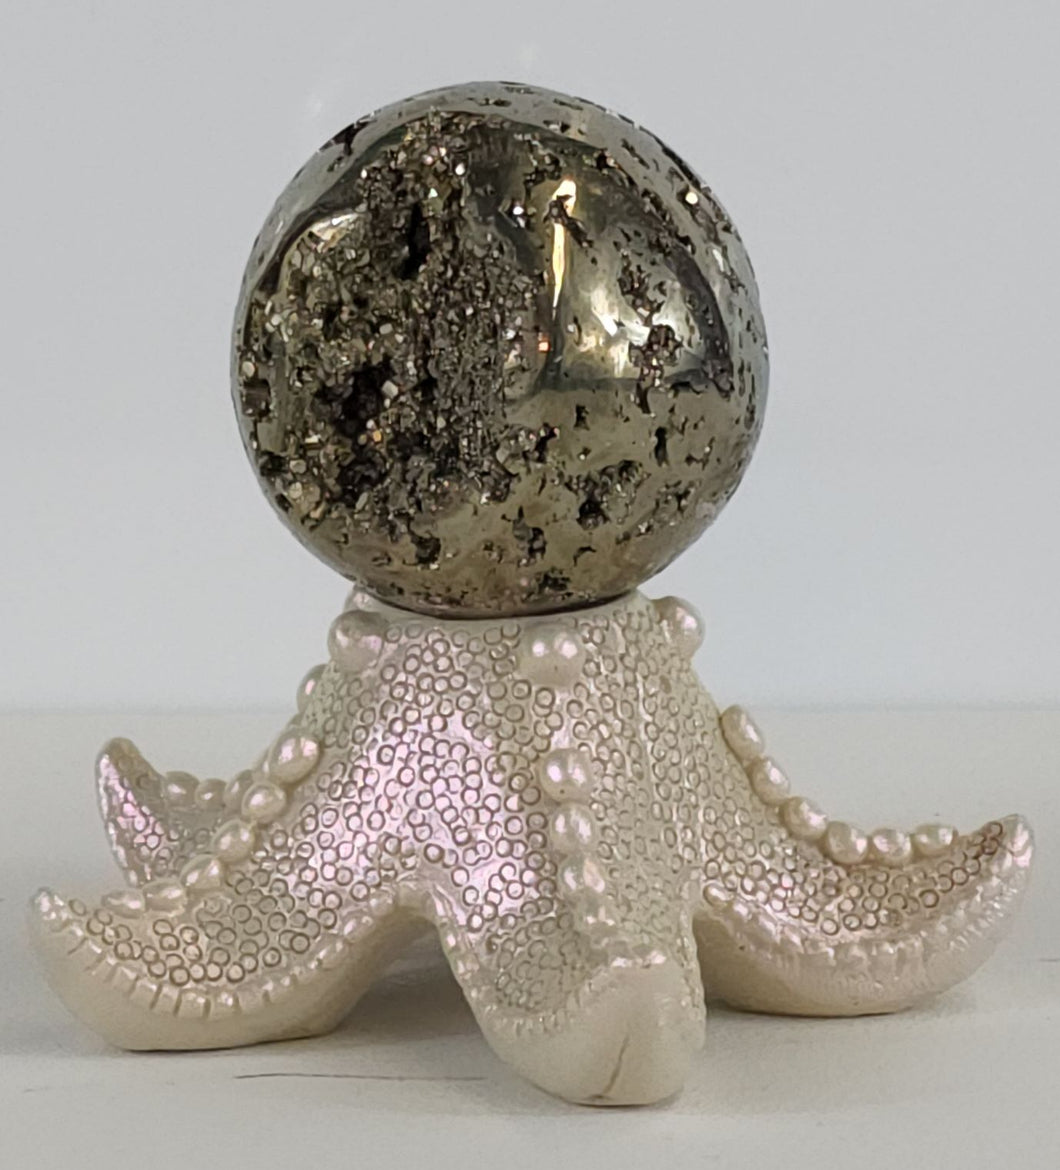 Pyrite Sphere With Druzy